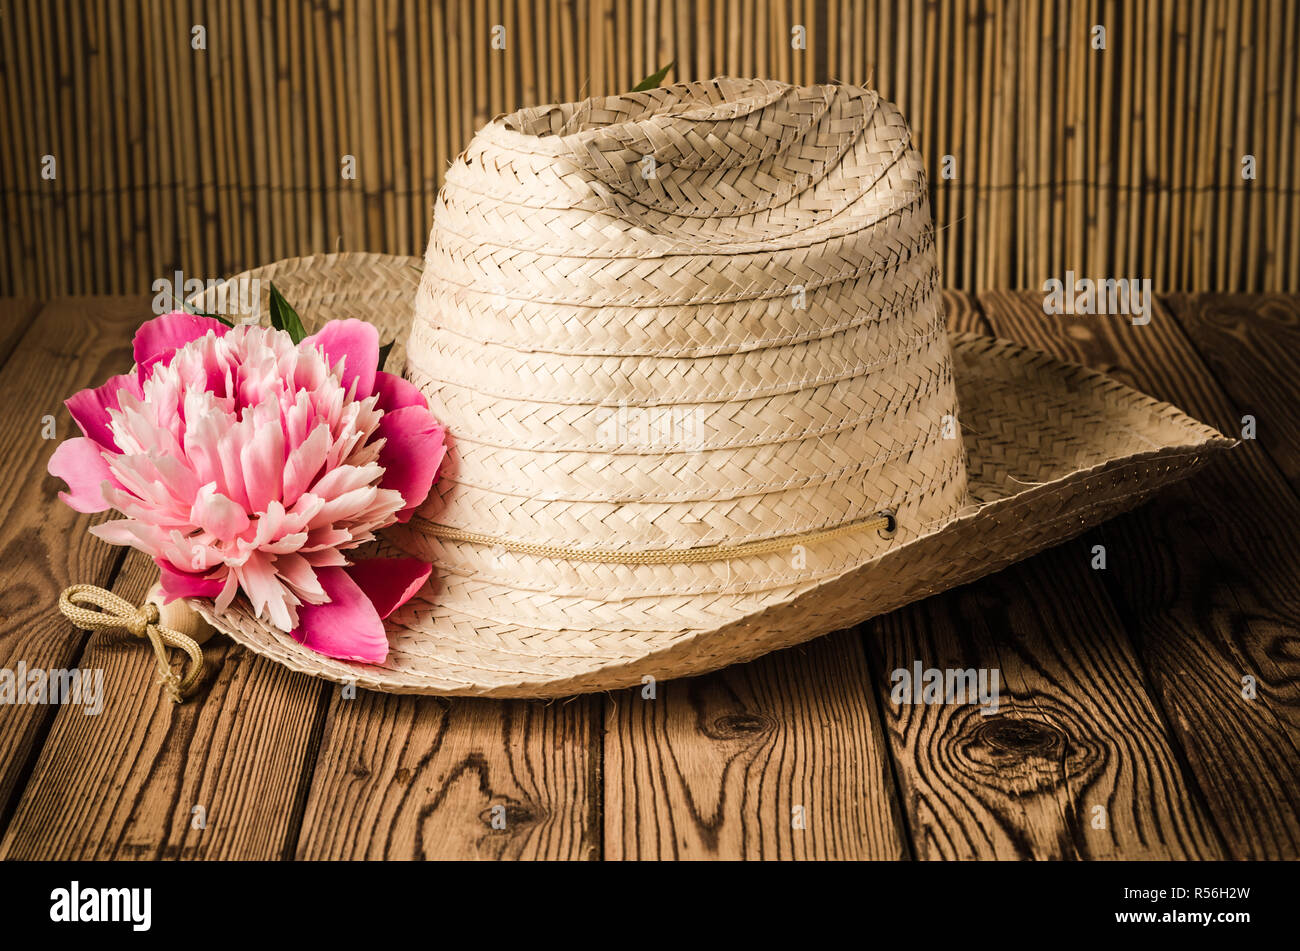 Straw hat and peony flower, close-up Stock Photo